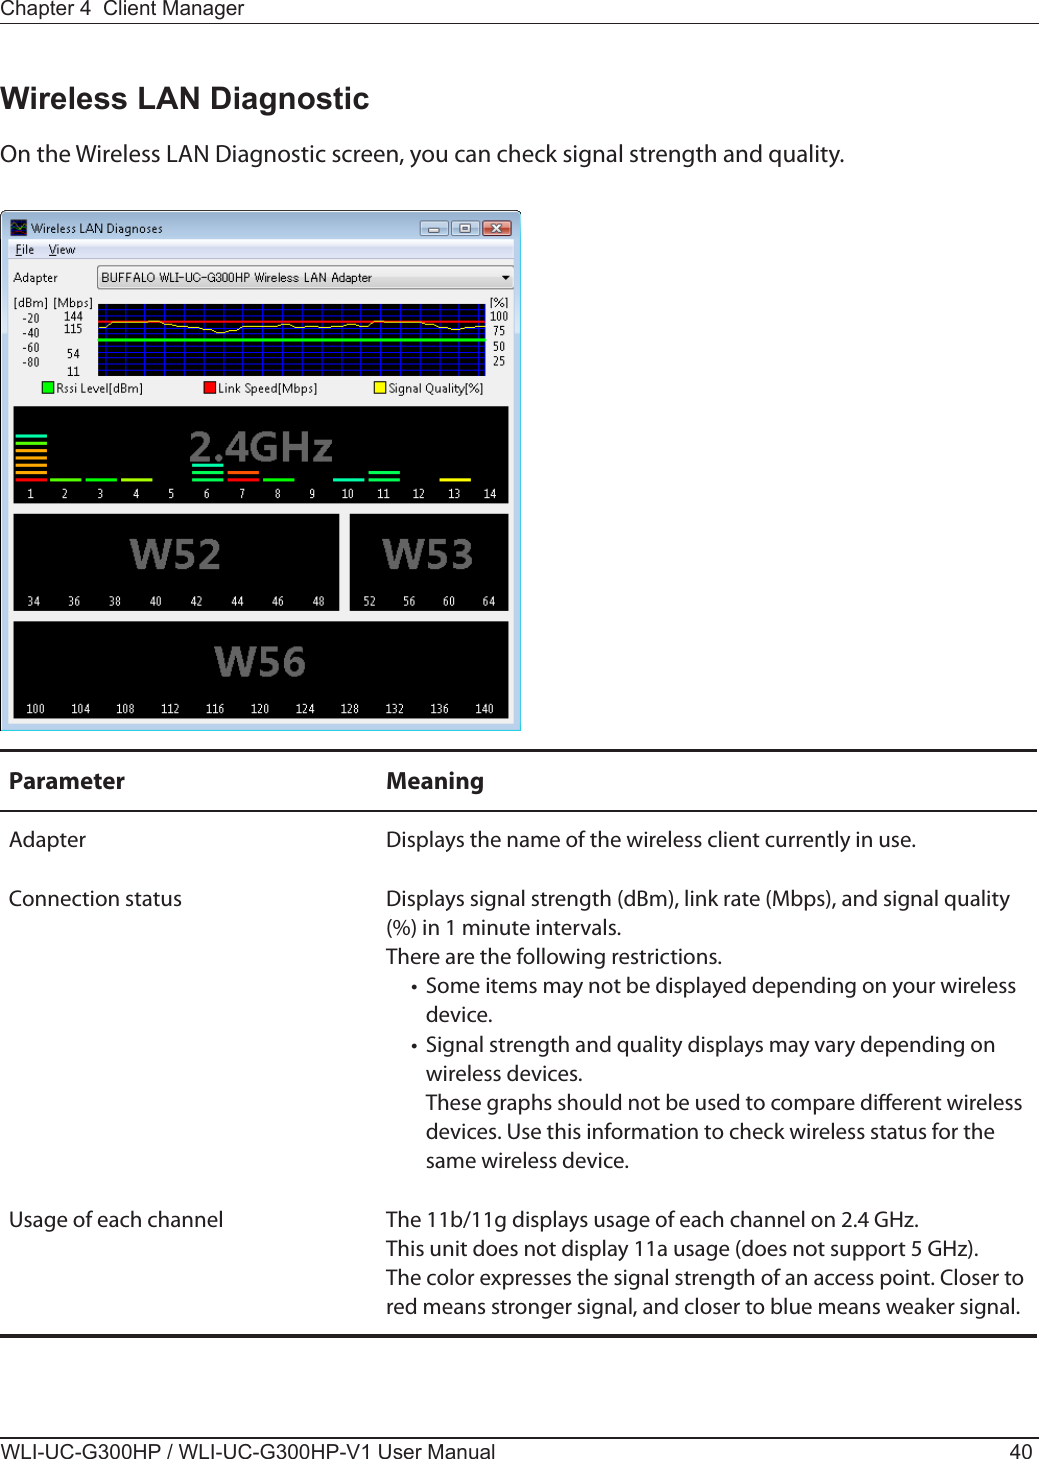 WLI-UC-G300HP / WLI-UC-G300HP-V1 User Manual 40Chapter 4  Client ManagerWireless LAN DiagnosticOn the Wireless LAN Diagnostic screen, you can check signal strength and quality.Parameter MeaningAdapter Displays the name of the wireless client currently in use.Connection status Displays signal strength (dBm), link rate (Mbps), and signal quality (%) in 1 minute intervals.There are the following restrictions.  •  Some items may not be displayed depending on your wireless device.  •  Signal strength and quality displays may vary depending on wireless devices.    These graphs should not be used to compare dierent wireless devices. Use this information to check wireless status for the same wireless device.Usage of each channel The 11b/11g displays usage of each channel on 2.4 GHz.This unit does not display 11a usage (does not support 5 GHz).The color expresses the signal strength of an access point. Closer to red means stronger signal, and closer to blue means weaker signal.